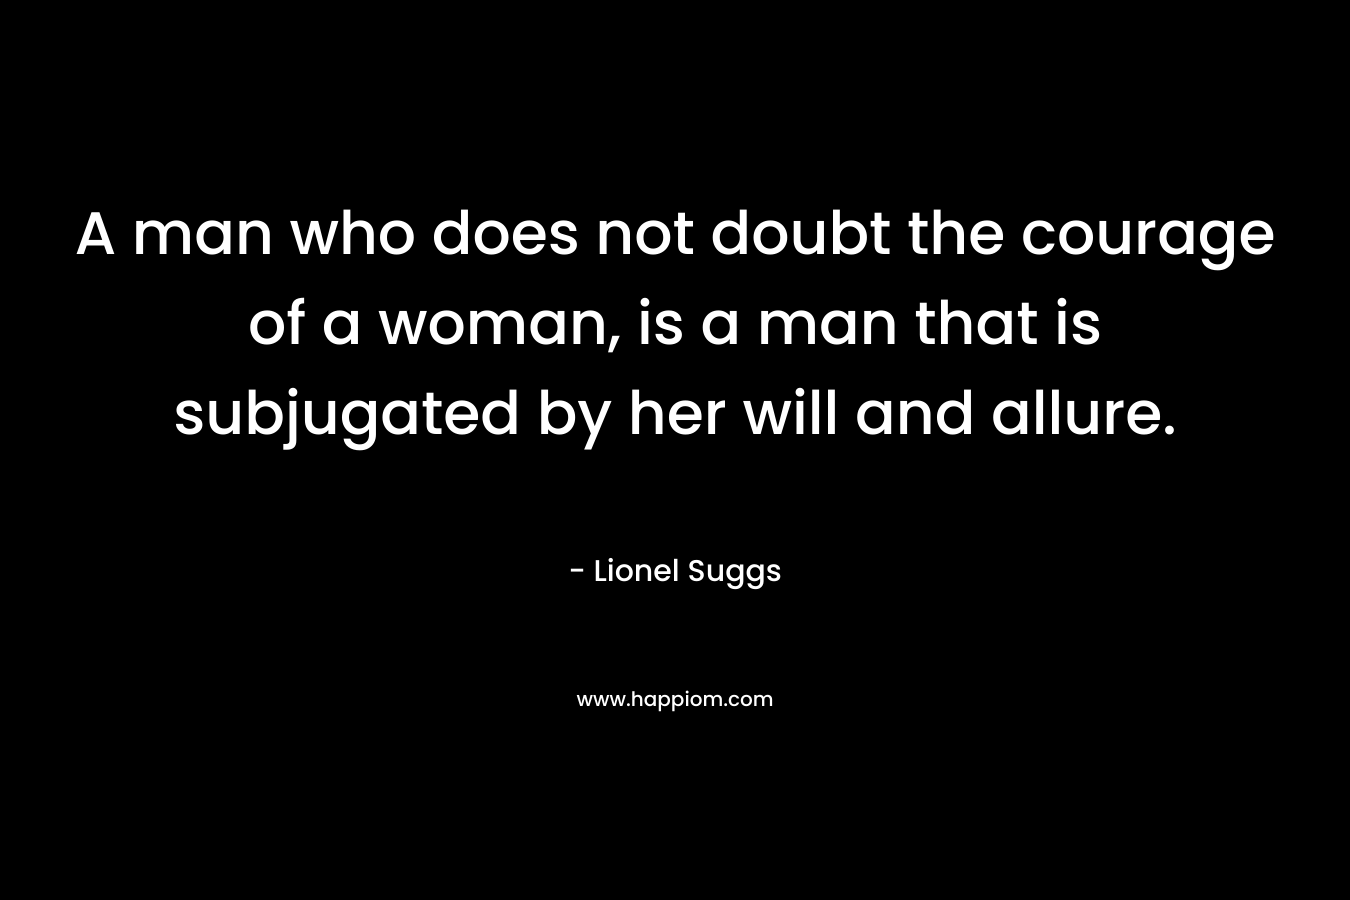 A man who does not doubt the courage of a woman, is a man that is subjugated by her will and allure. – Lionel Suggs